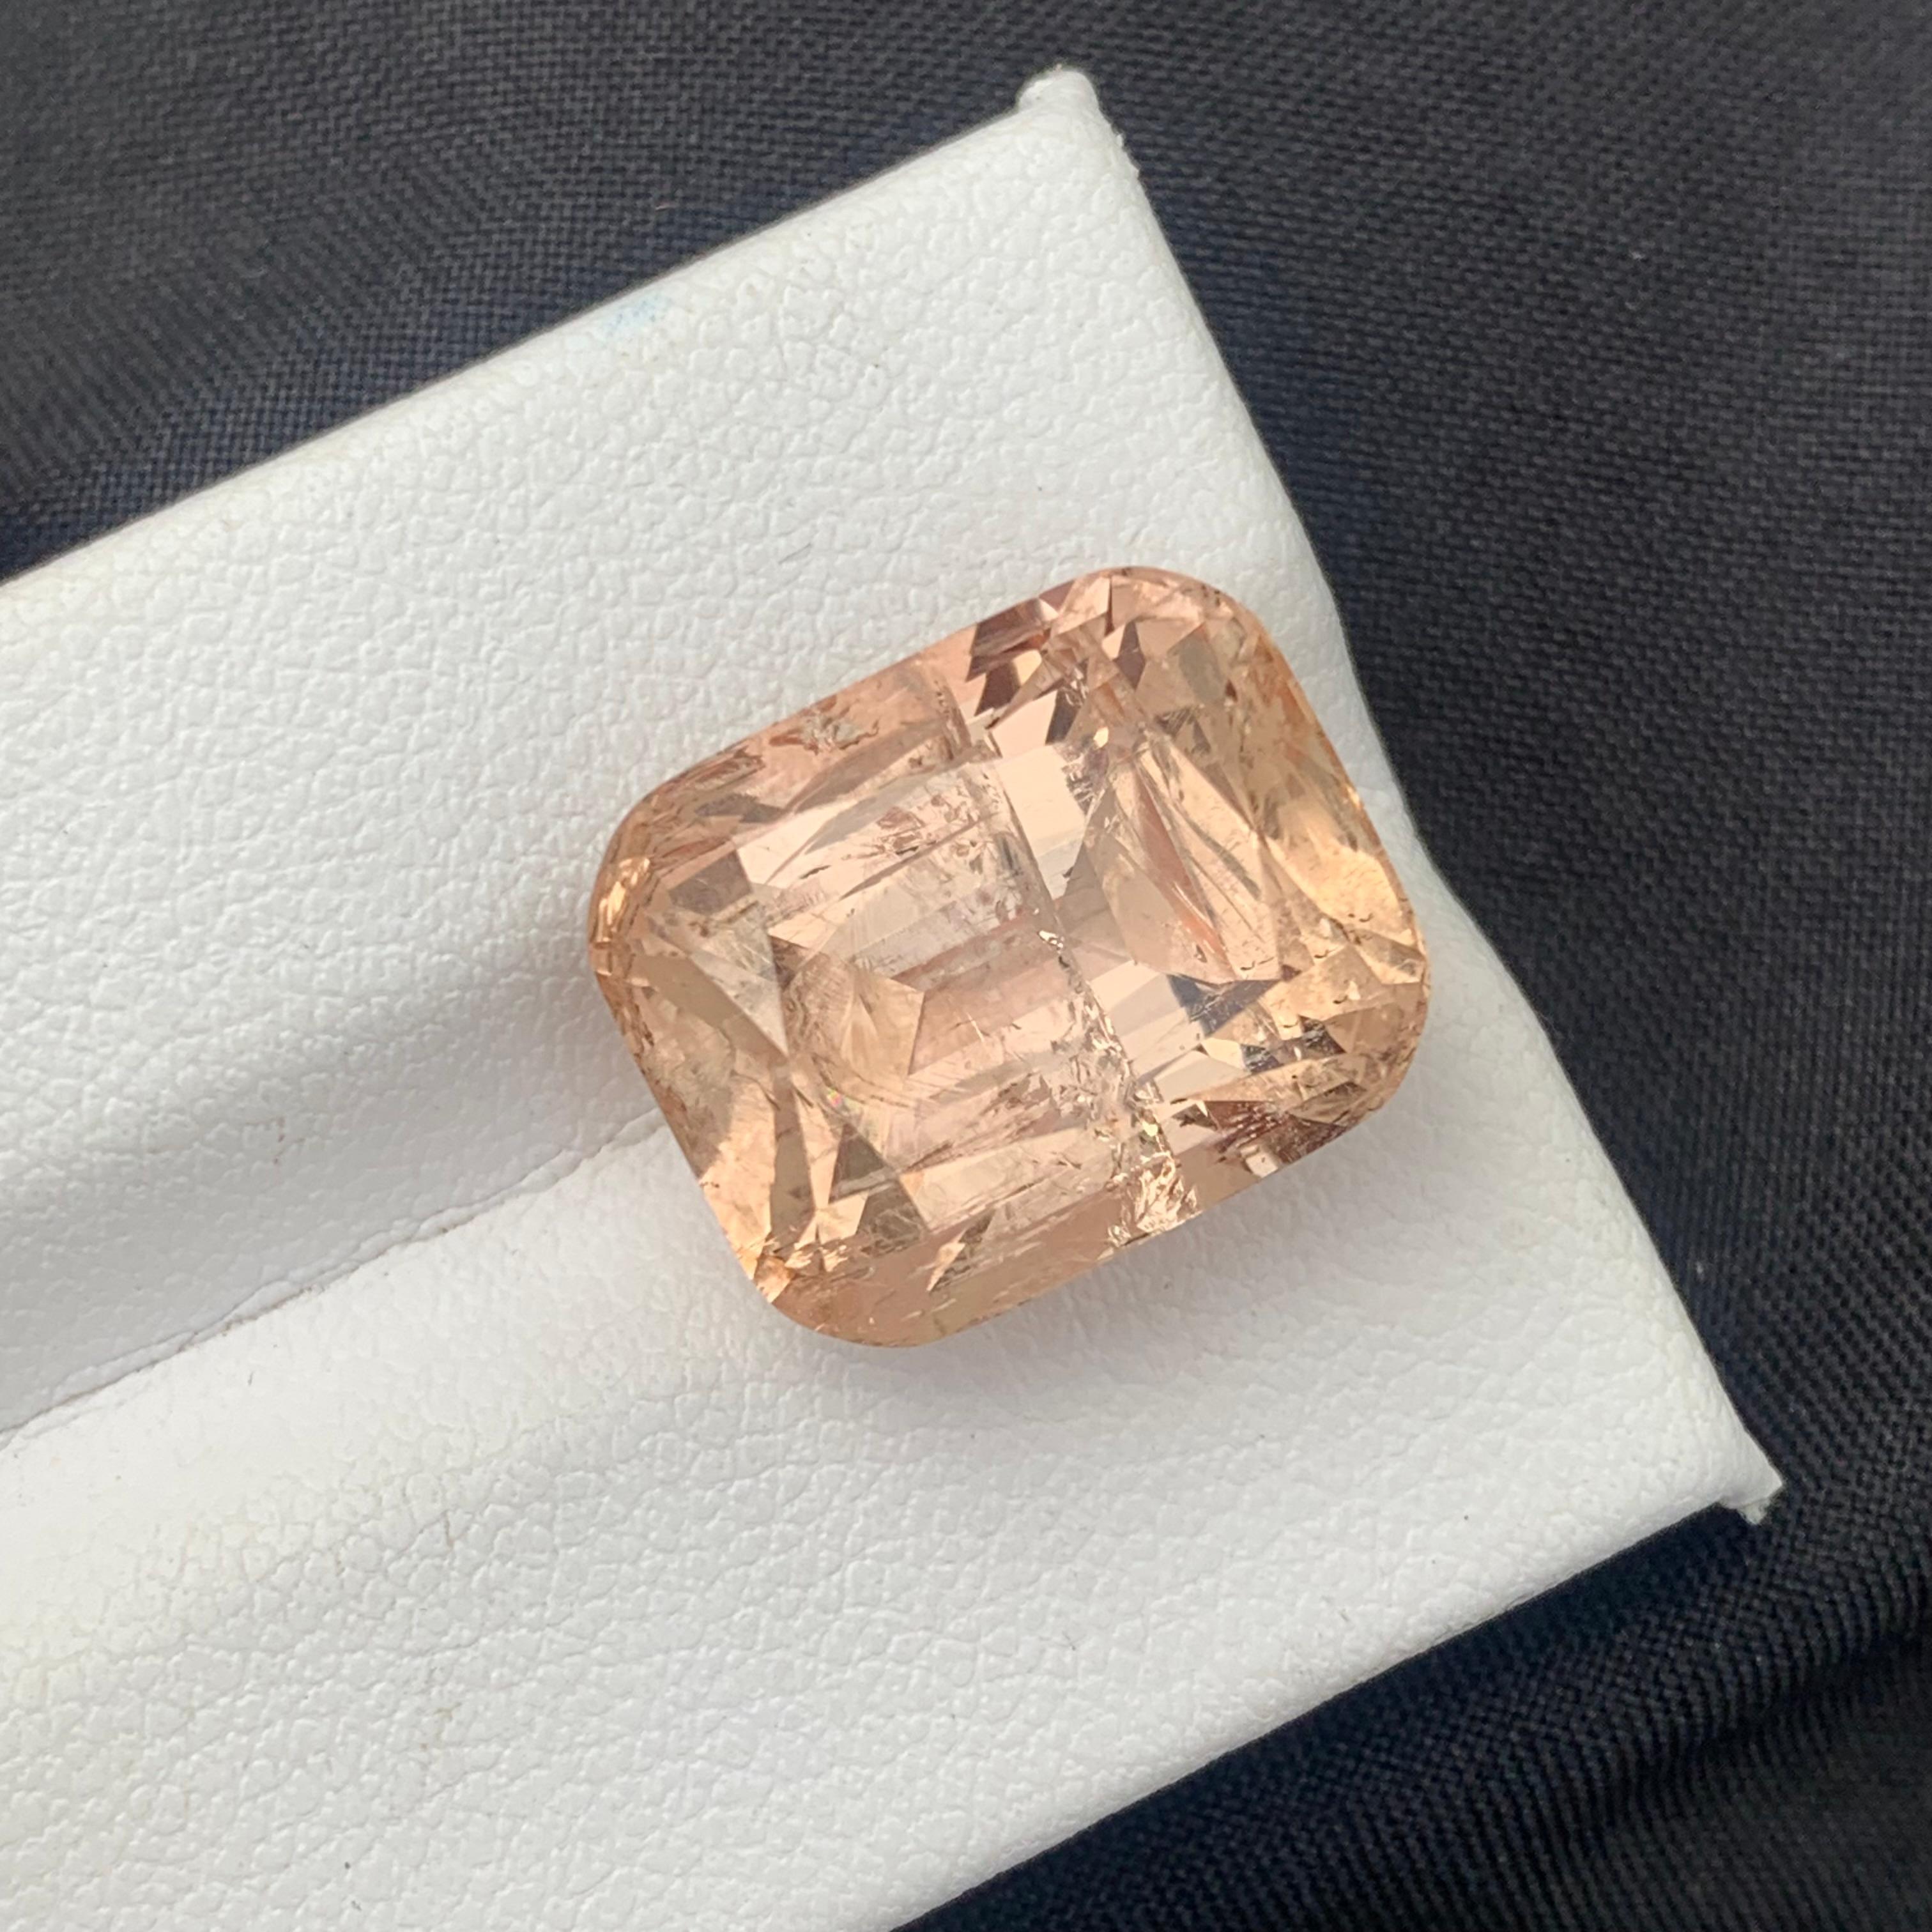 Faceted Imperial Topaz 
Weight: 20.30 Carats
Dimension: 15.5x12.8x11.1 Mm
Origin: Katlang Pakistan 
Shape: Cushion
Color; Peach Imperial 
Clarity: Included
Treatment: Non
Certificate: On Demand 
Imperial Topaz encourages healthy boundaries and helps